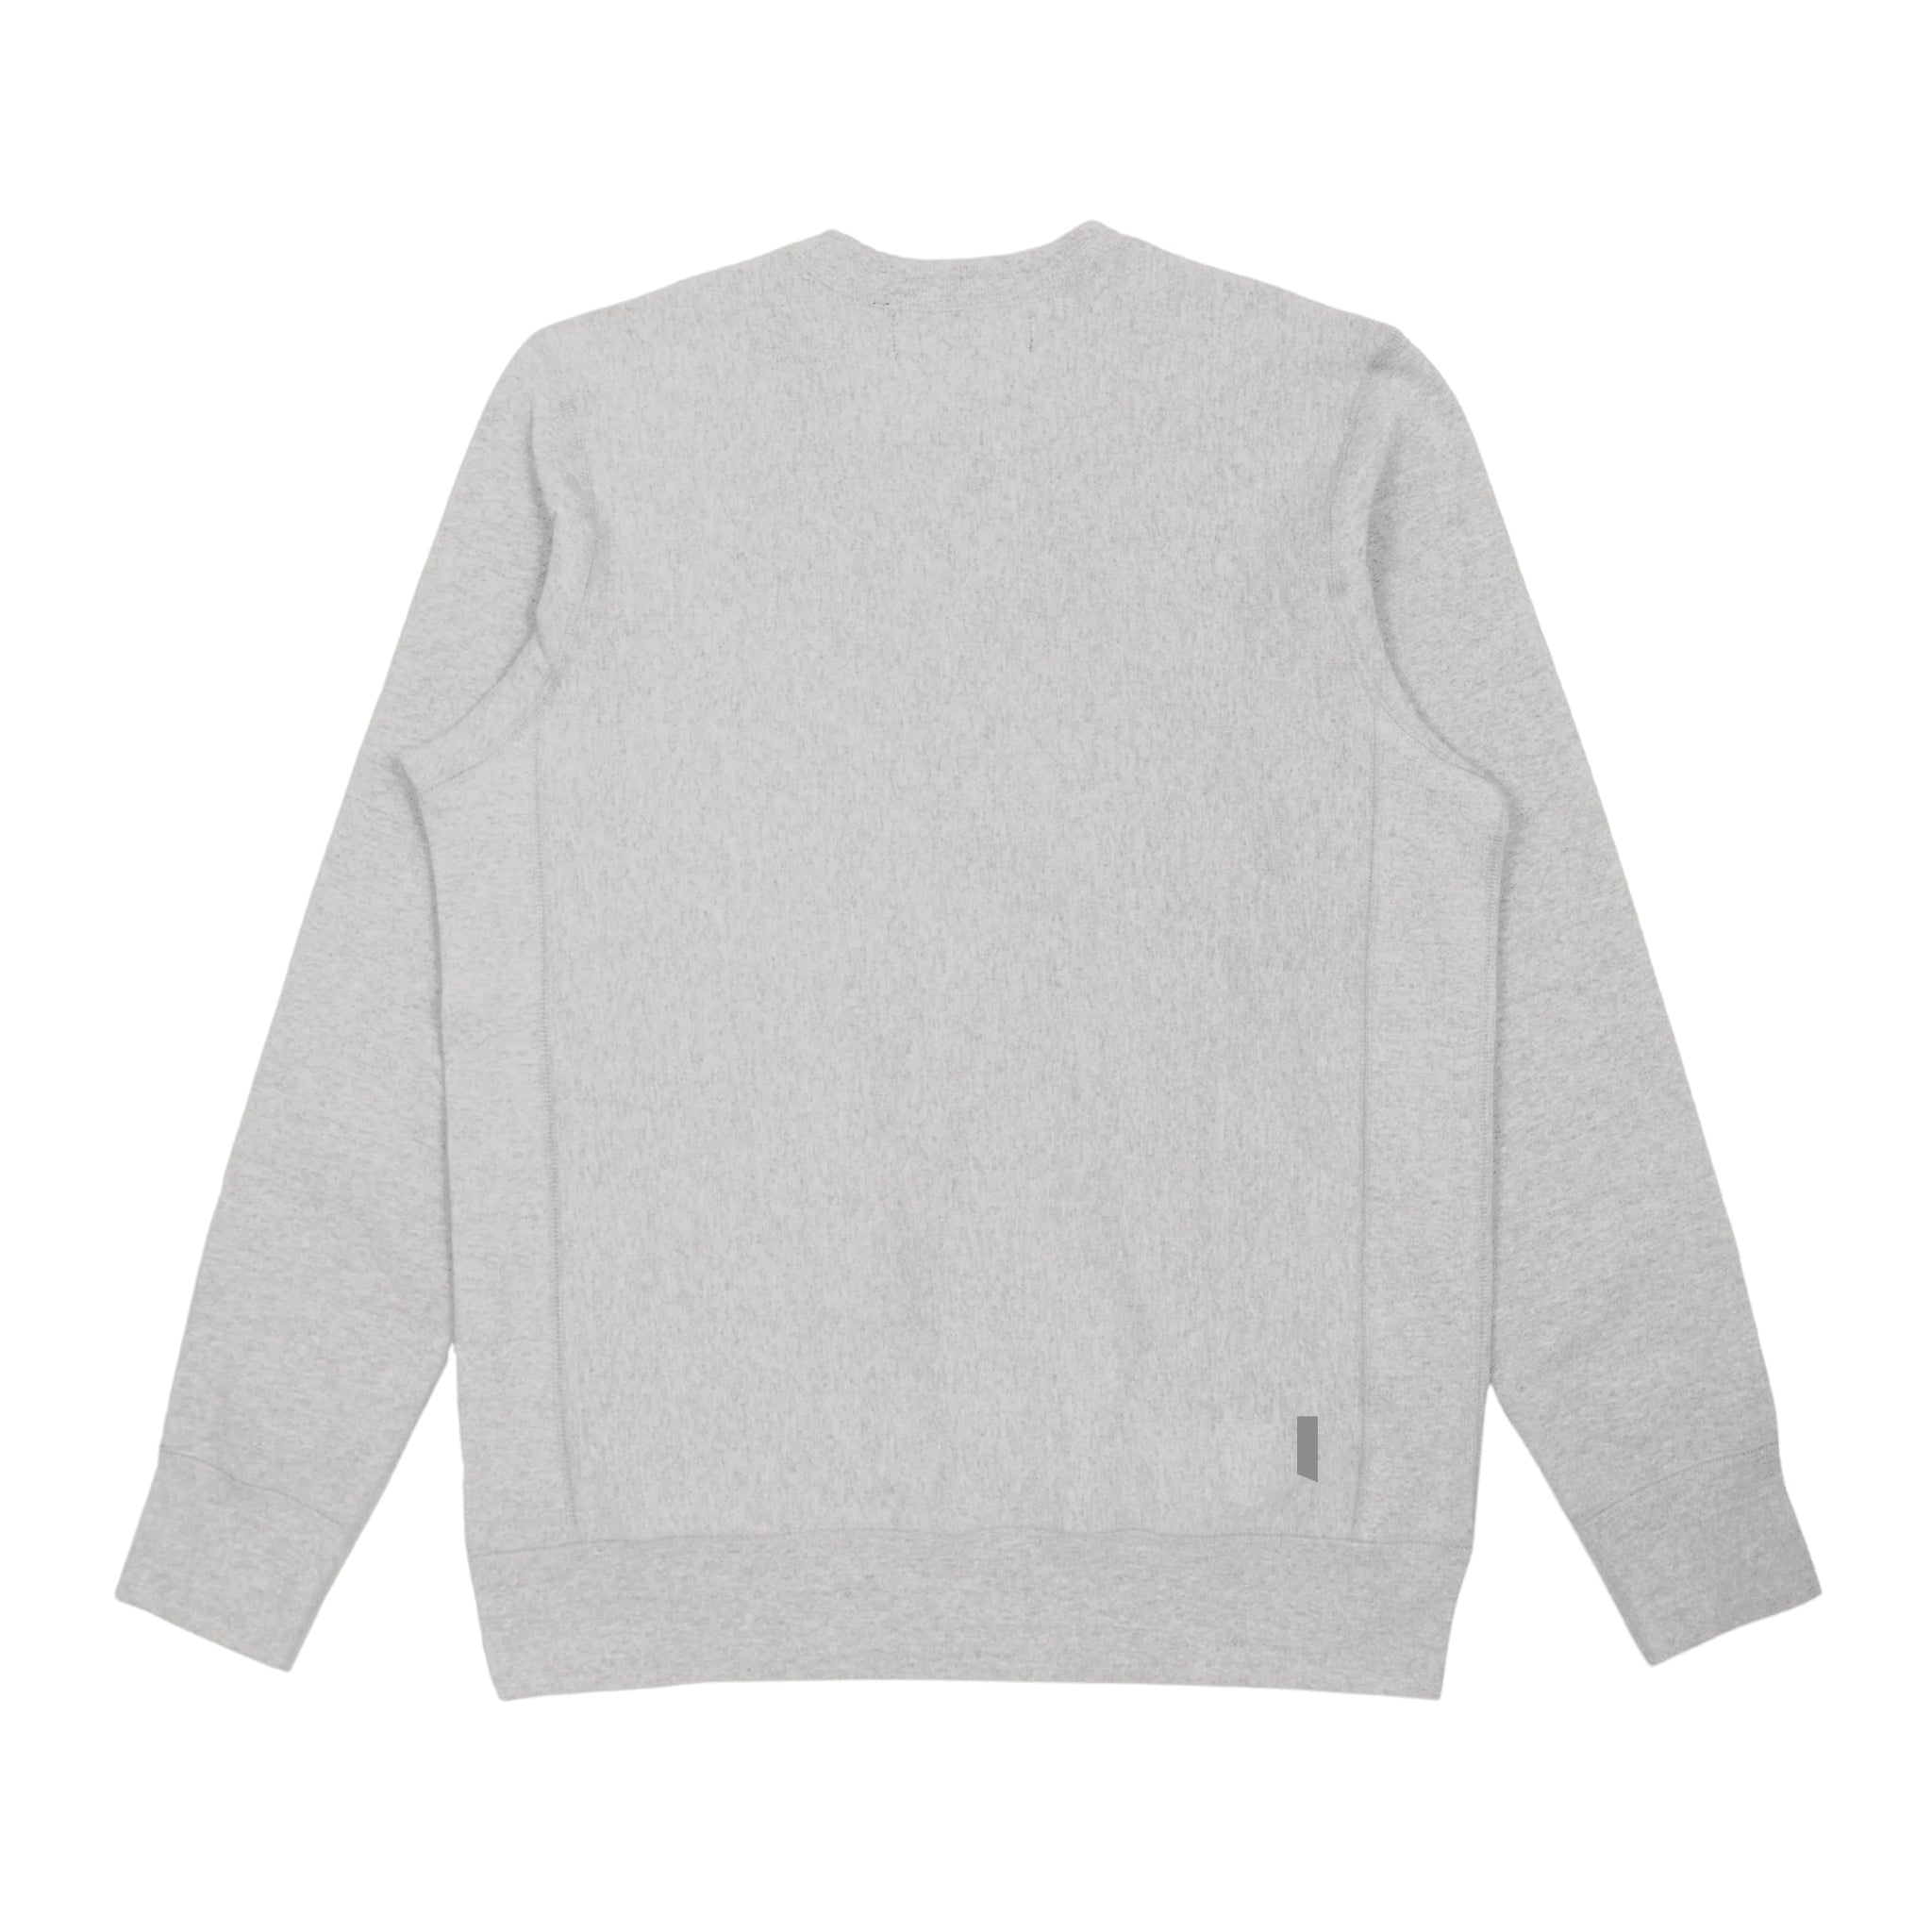 Back view of grey heavyweight knit crewneck in 100% cotton